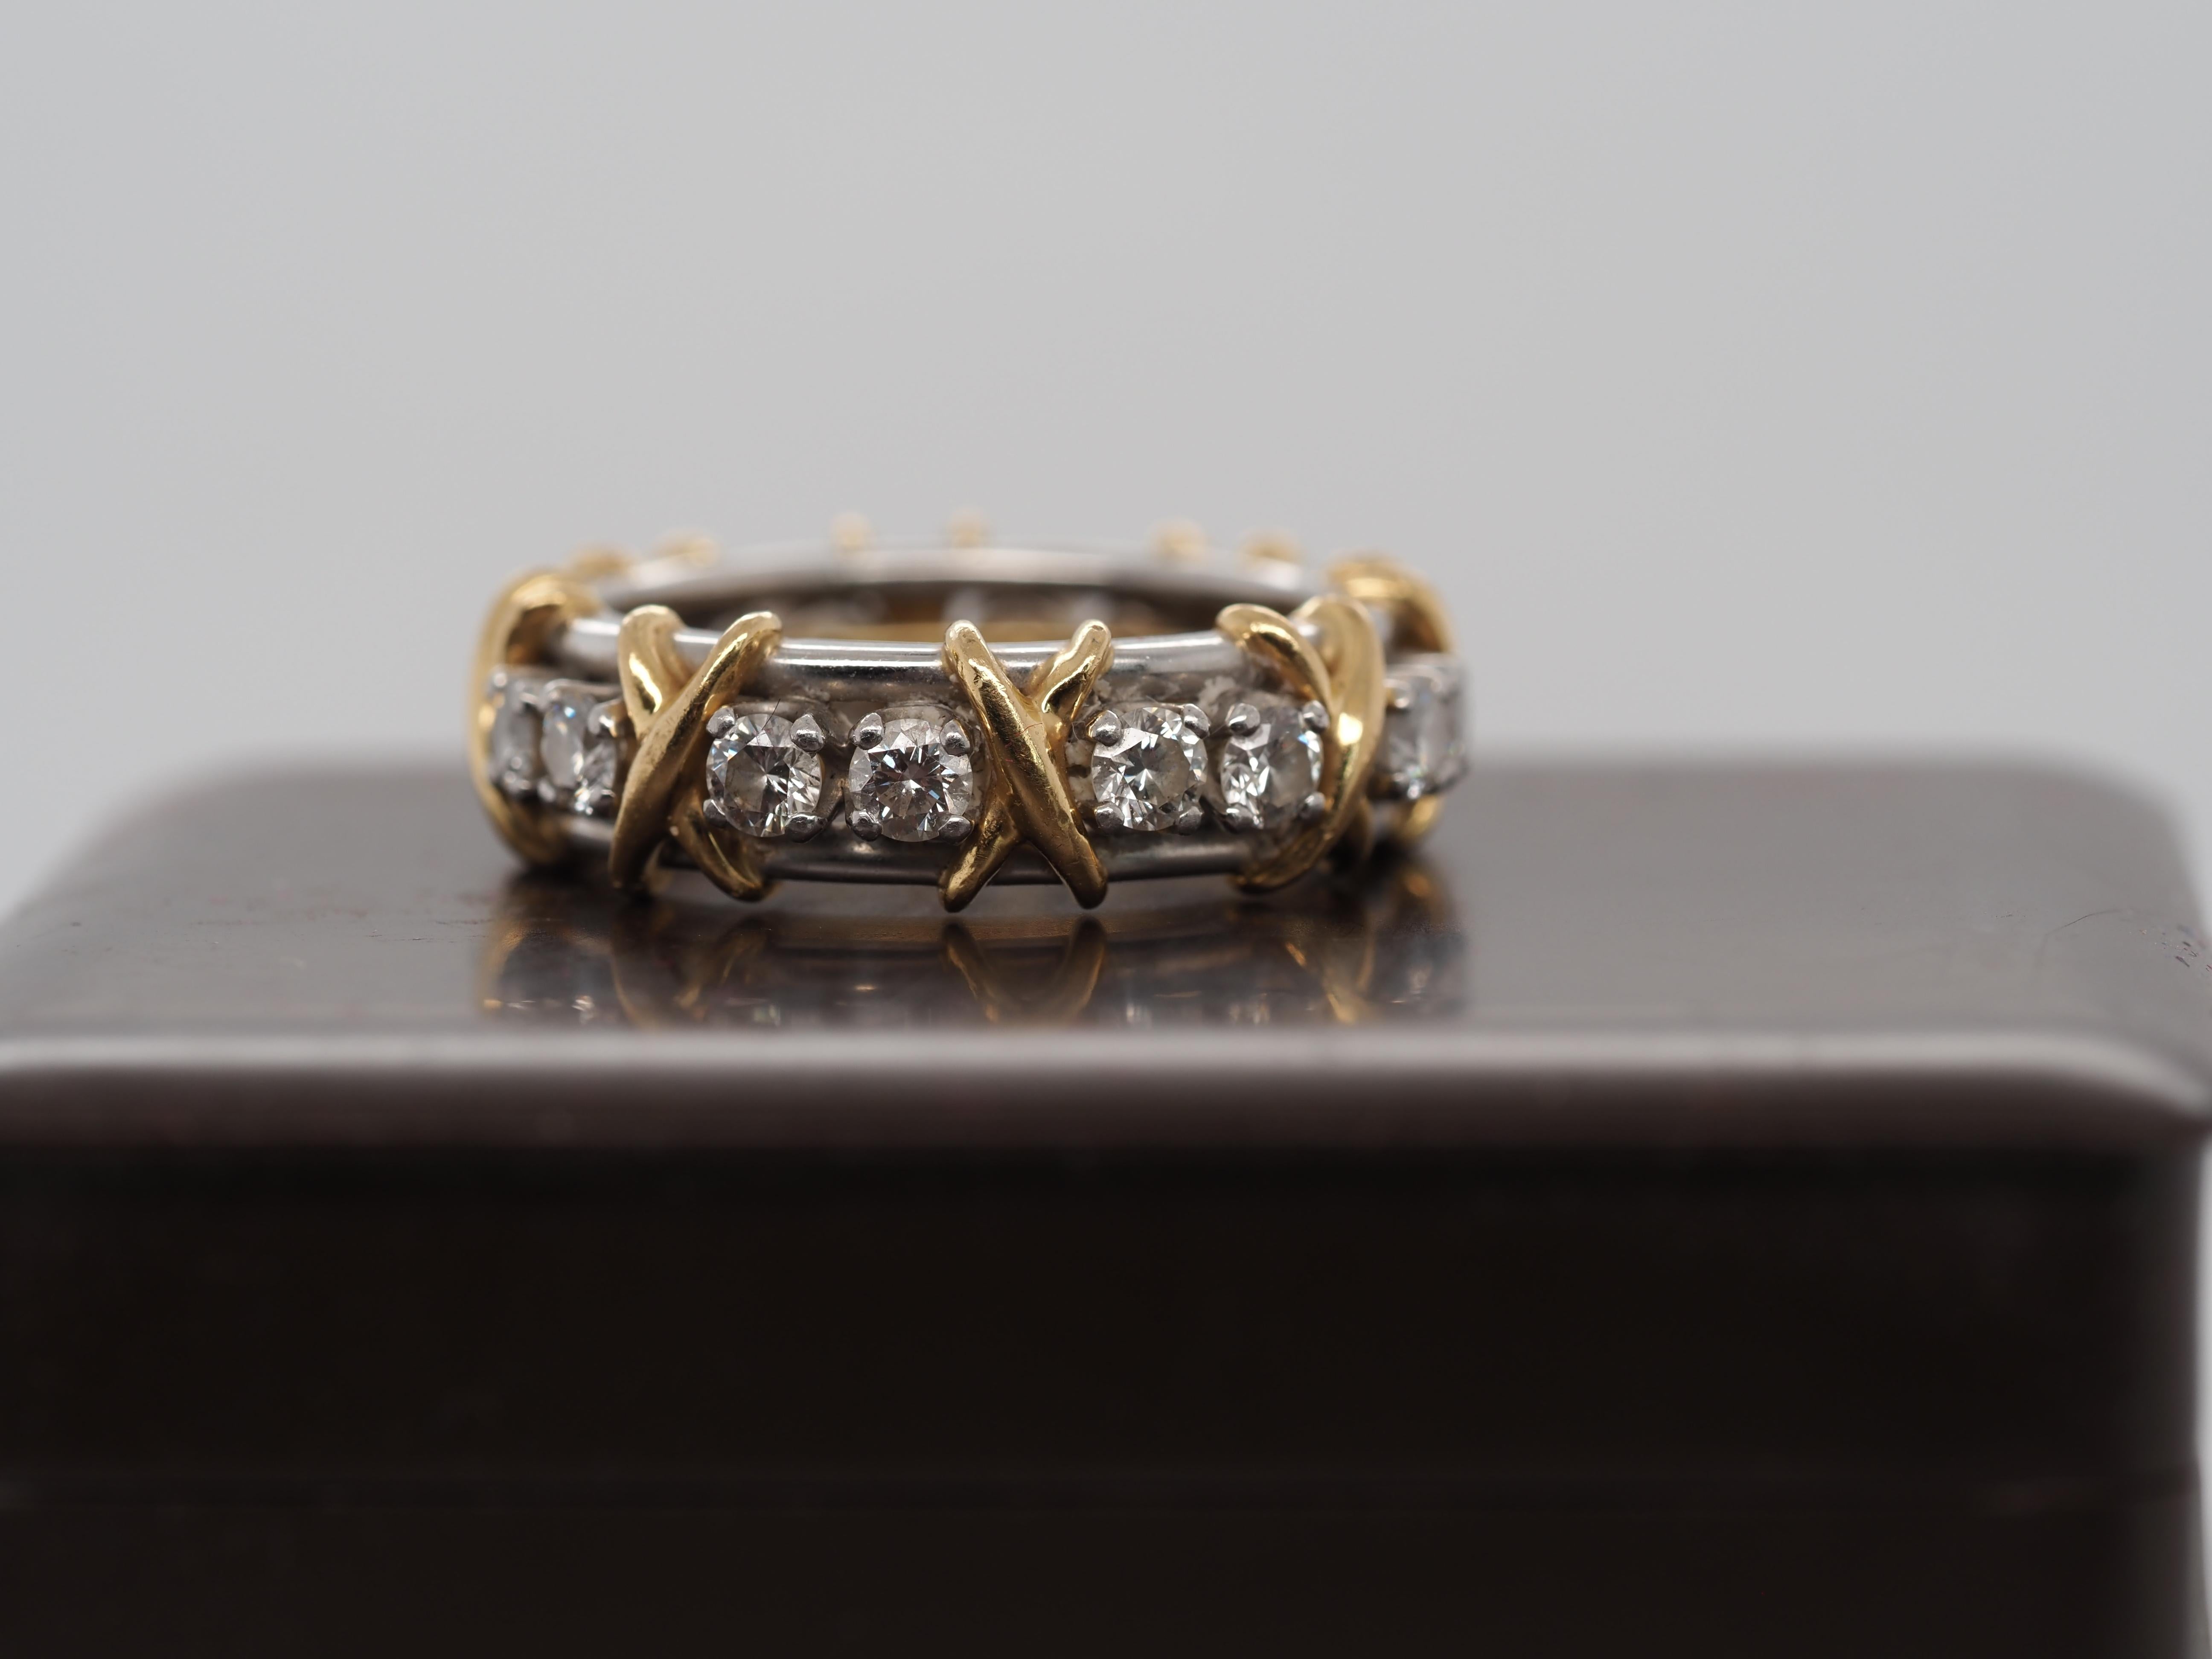 Item Details:
Ring Size: 6
Metal Type: Platinum & 18K Yellow Gold [Hallmarked, and Tested]
Weight: 9.0 grams
Diamond Details: 1.14ct total weight
Band Width: 5.5mm
Condition: Excellent